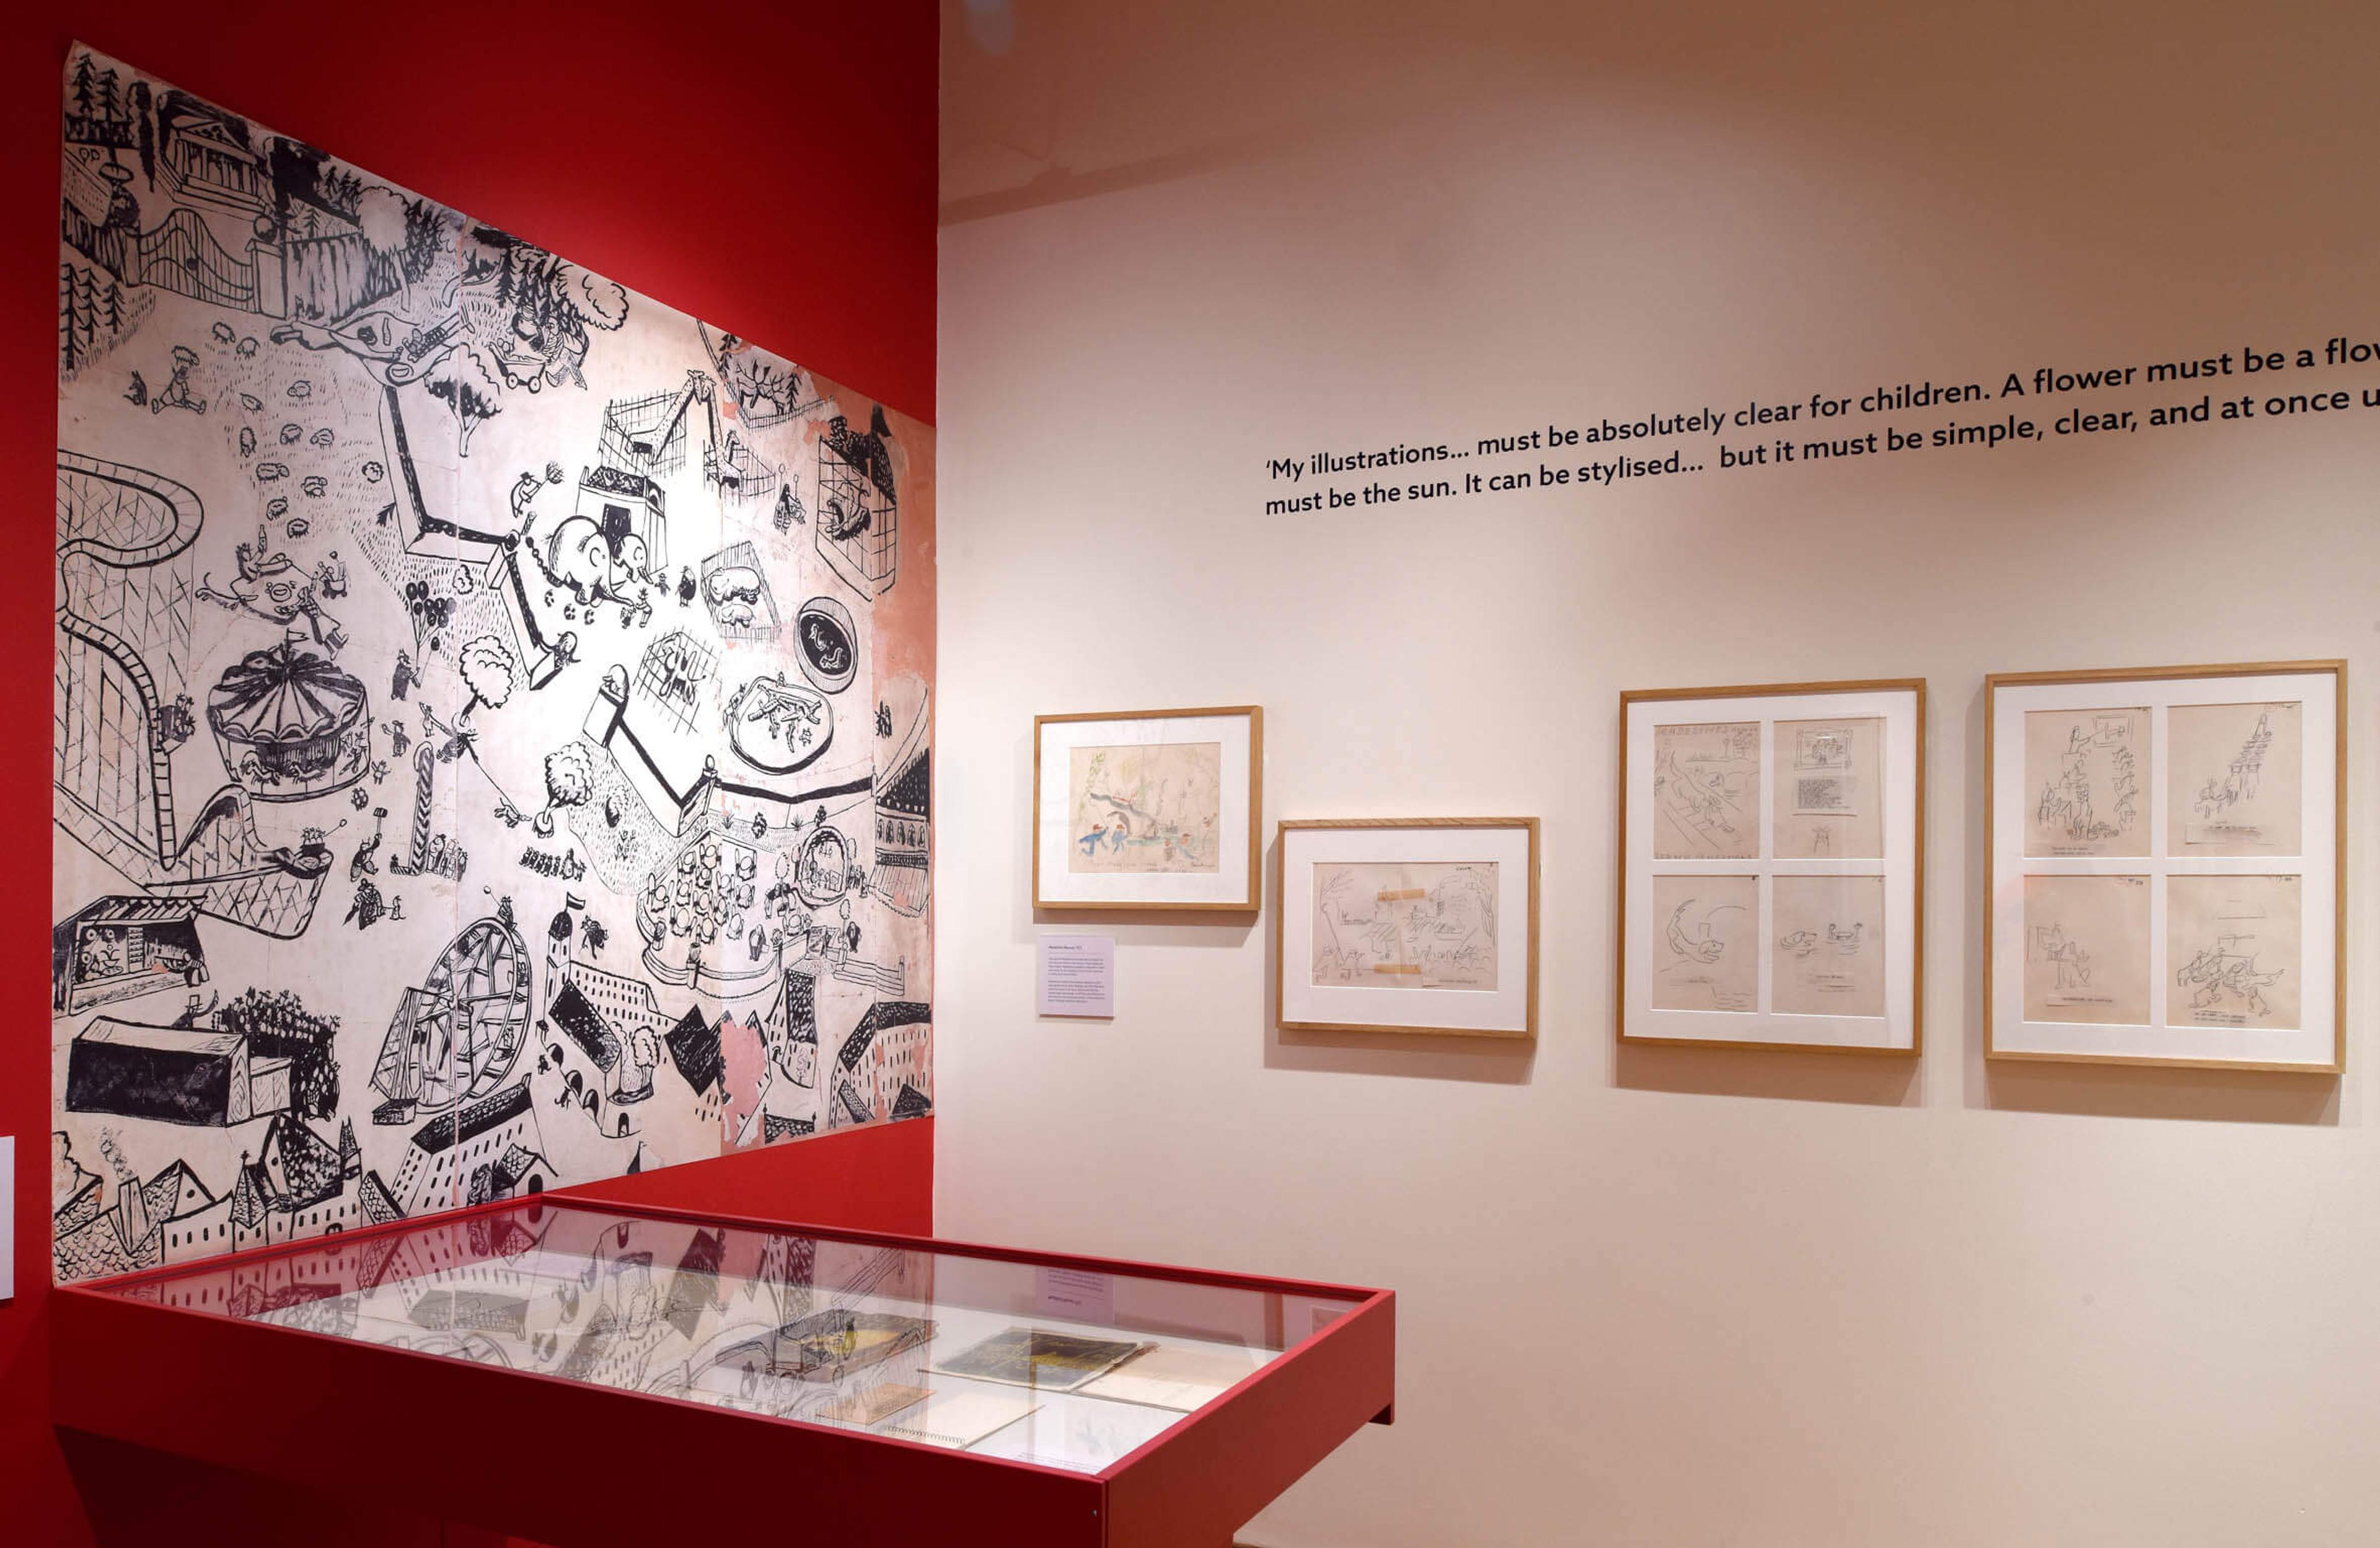 Photograph of a display case and framed artworks at the exhibition